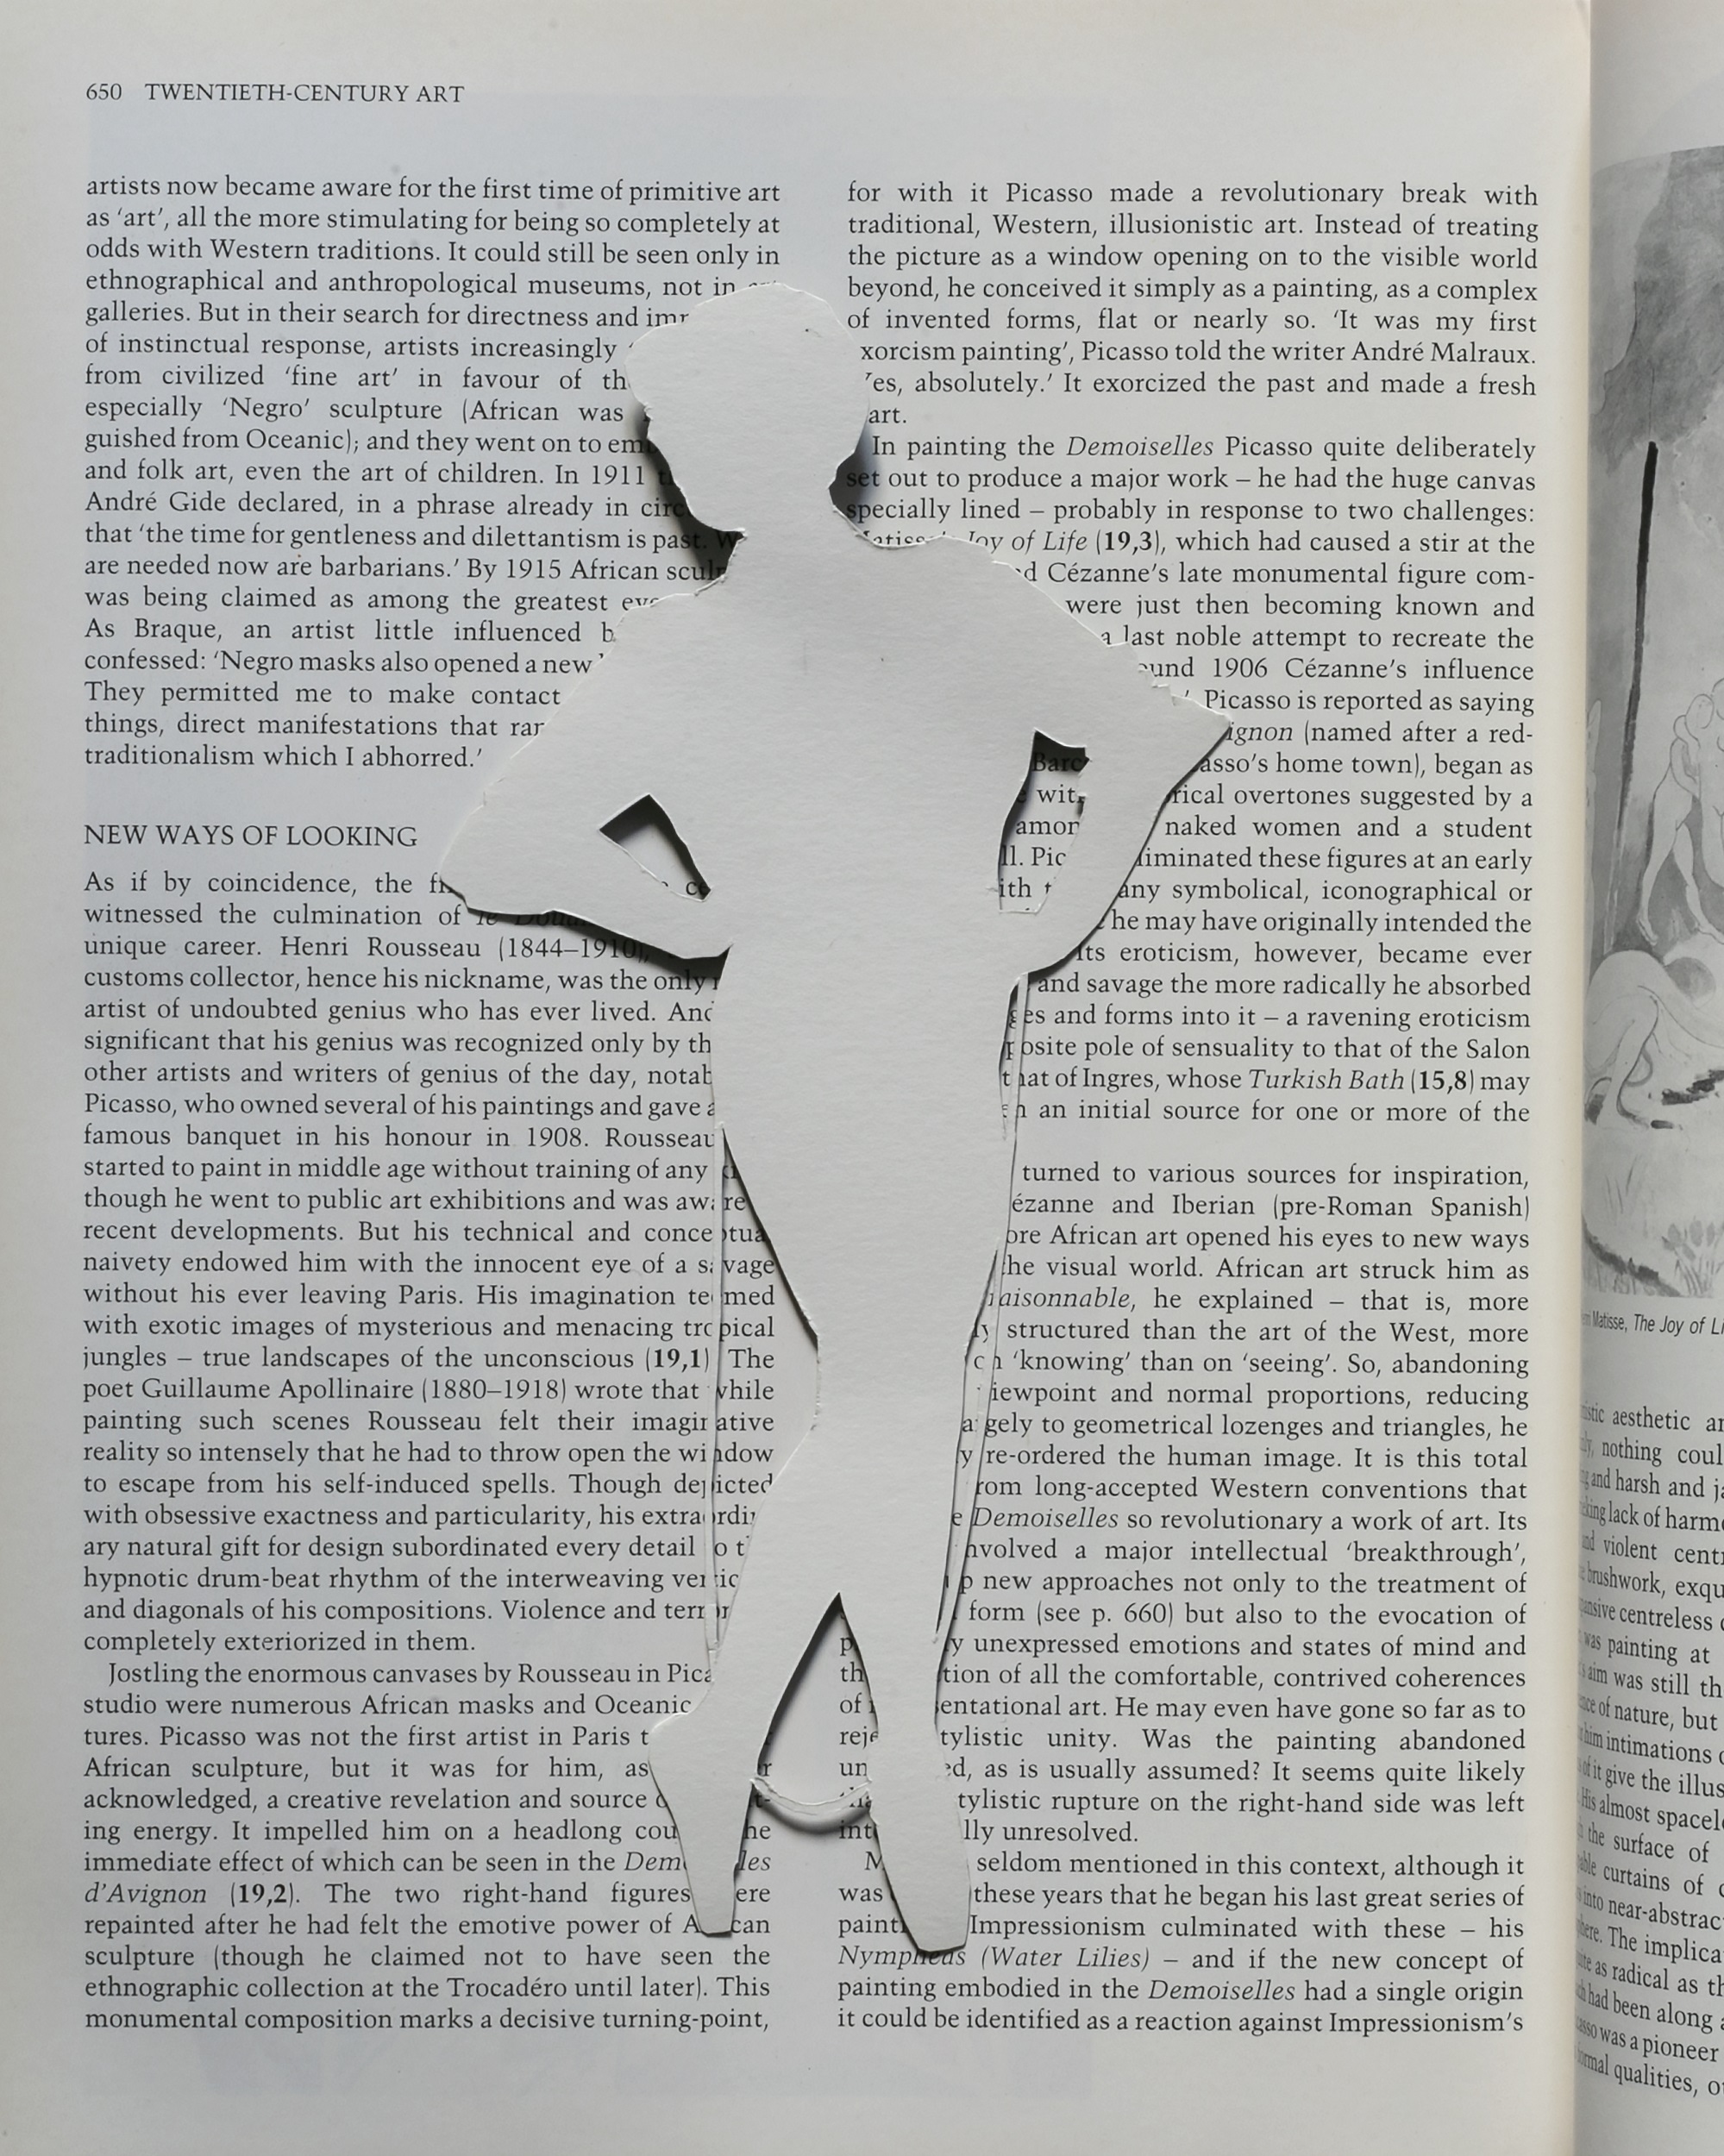 White, silhouetted form of the woman in fig. 3 set against a printed page from an academic text